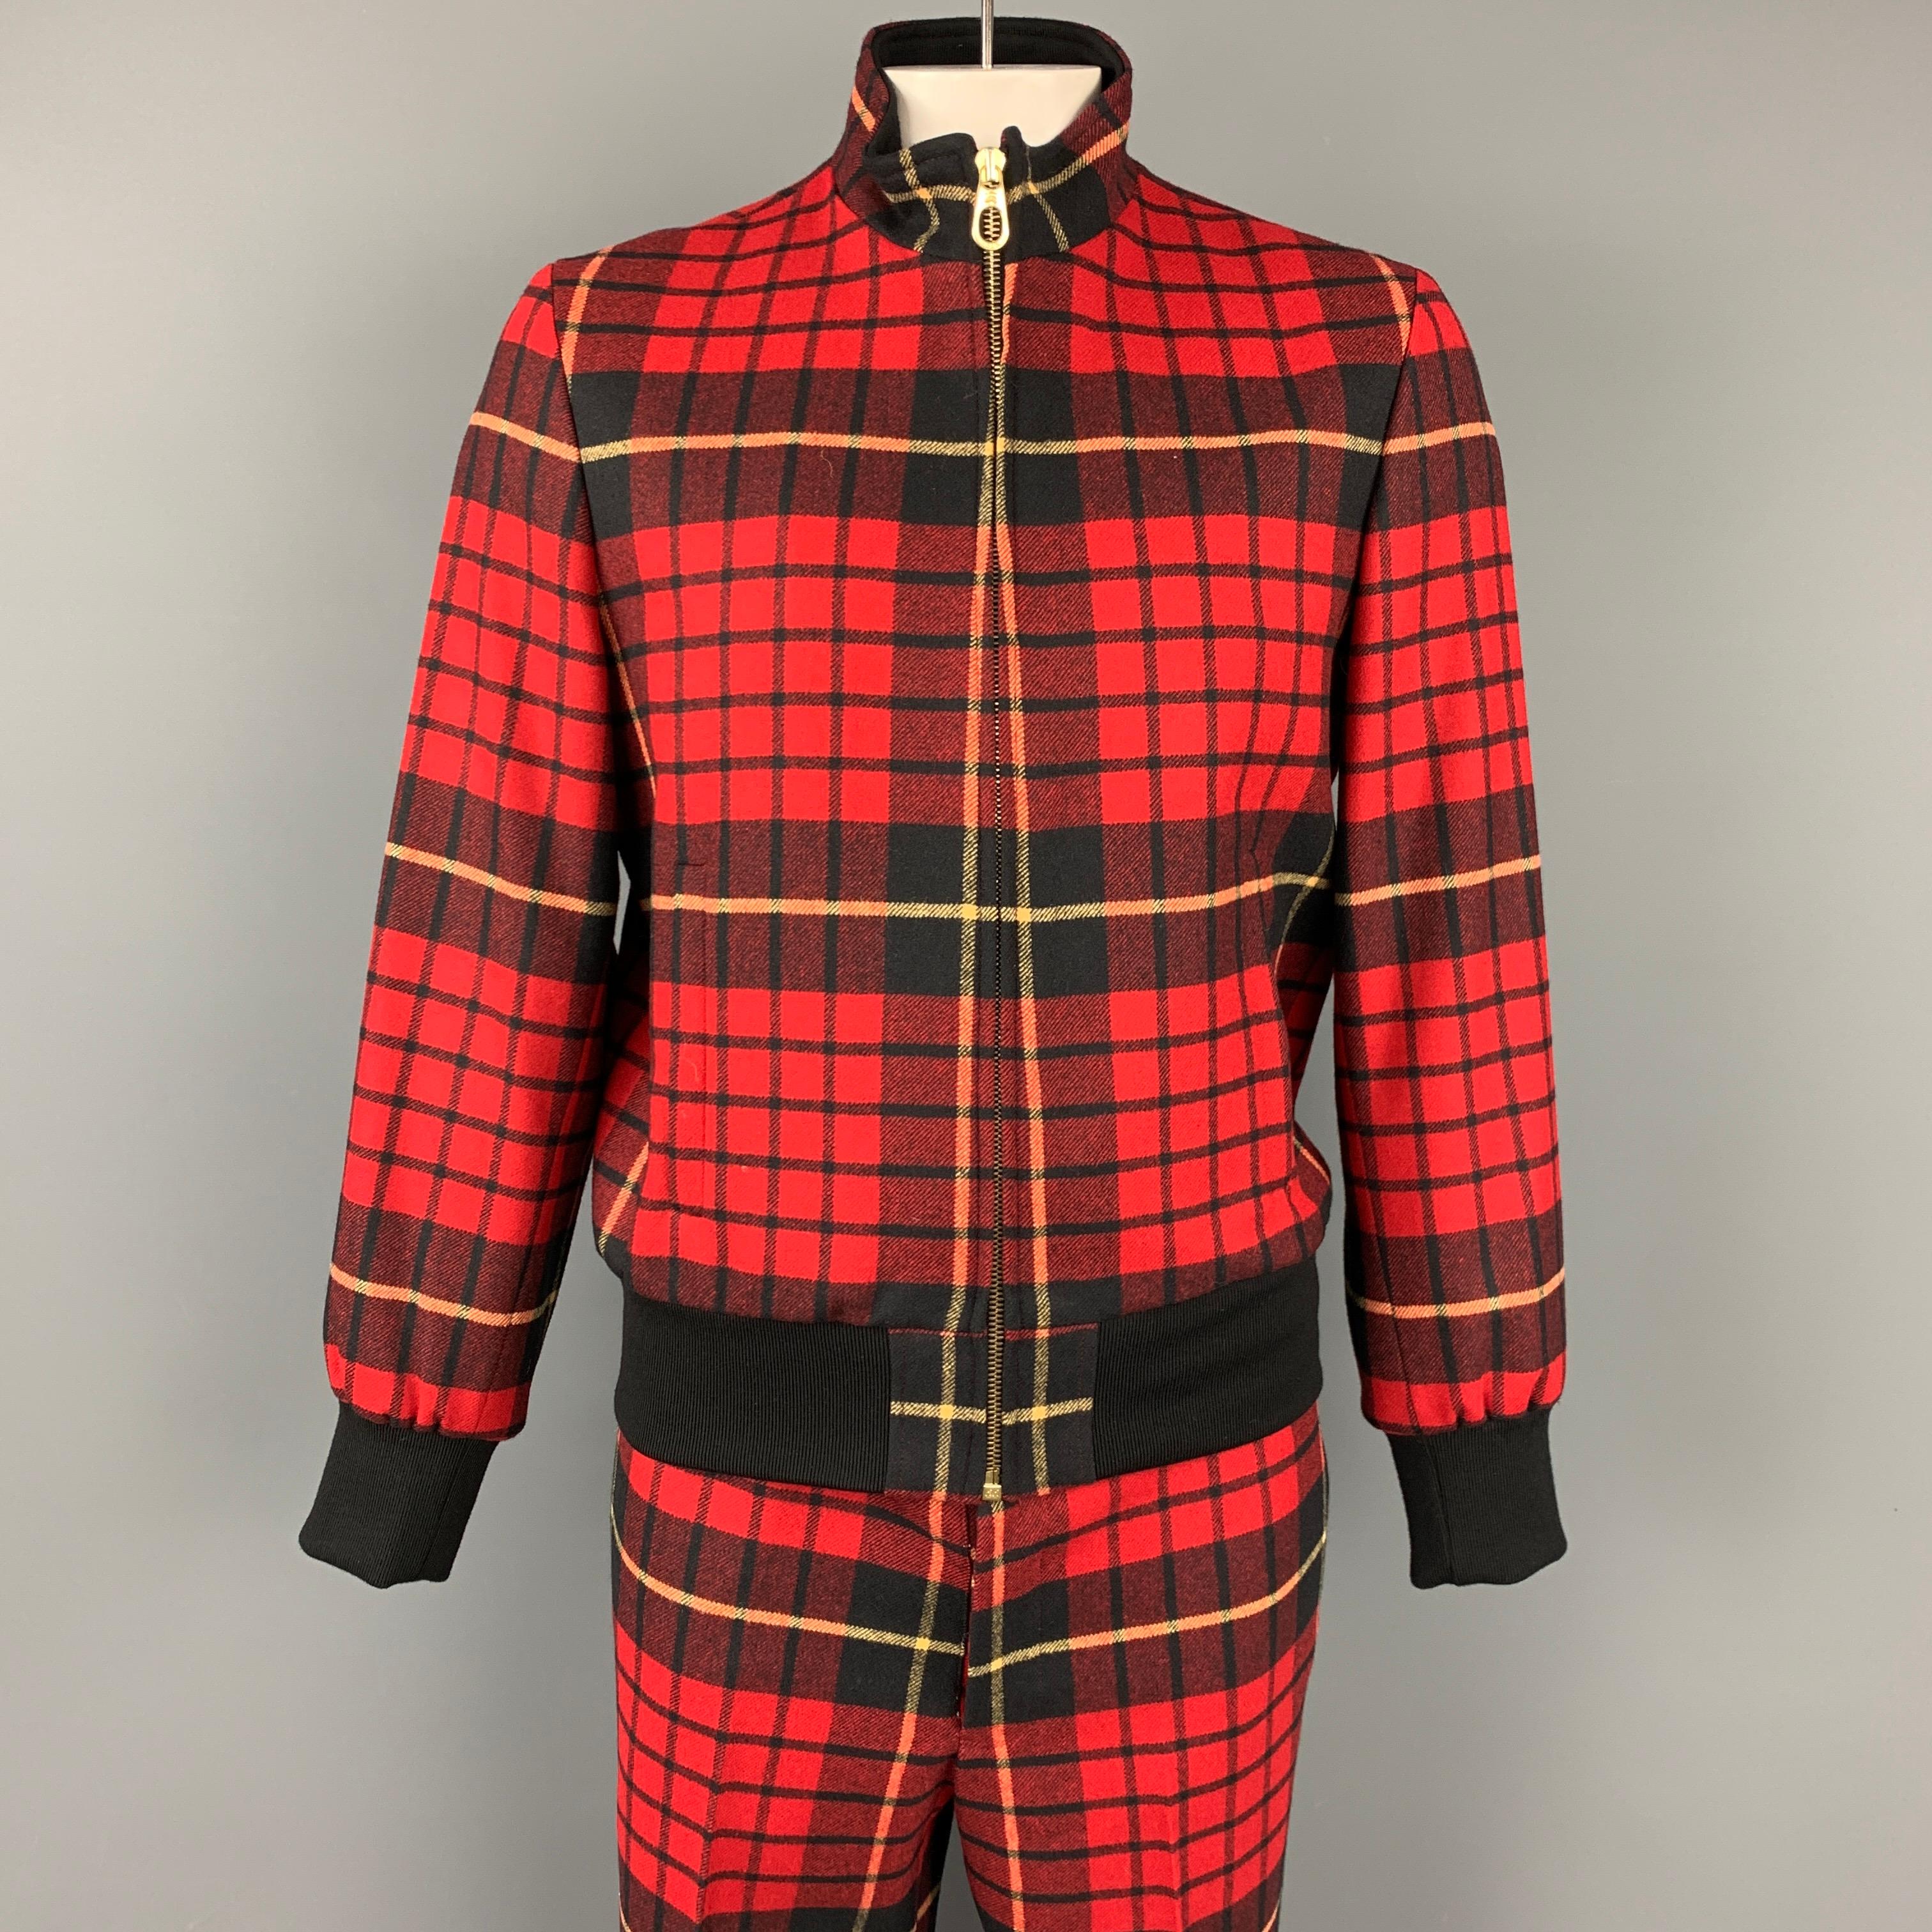 BLACK FLEECE set comes in a red & black plaid wool with a full liner featuring ribbed hem, zip up closure jacket. Also, includes matching flat front pants. Made in Romania.

New With Tags.
Marked: BB4

Measurements:

-Jacket
Shoulder: 18.5